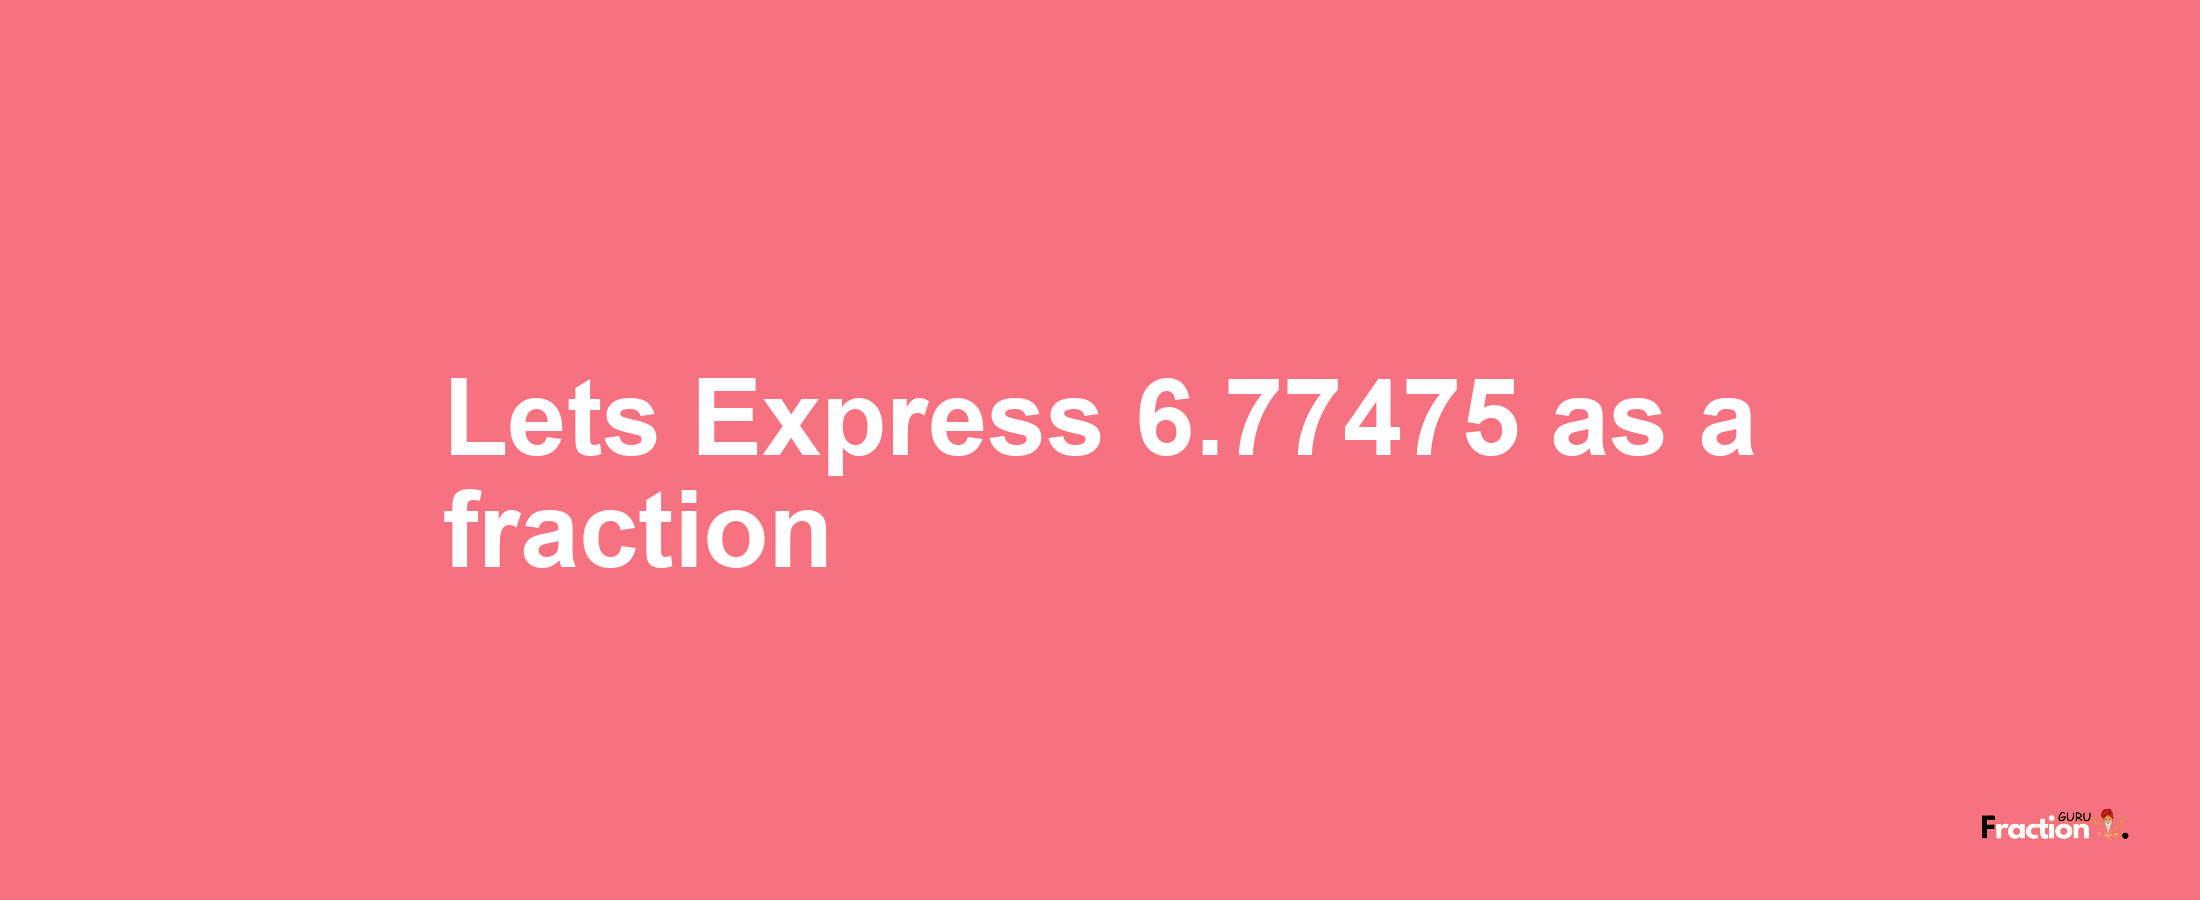 Lets Express 6.77475 as afraction